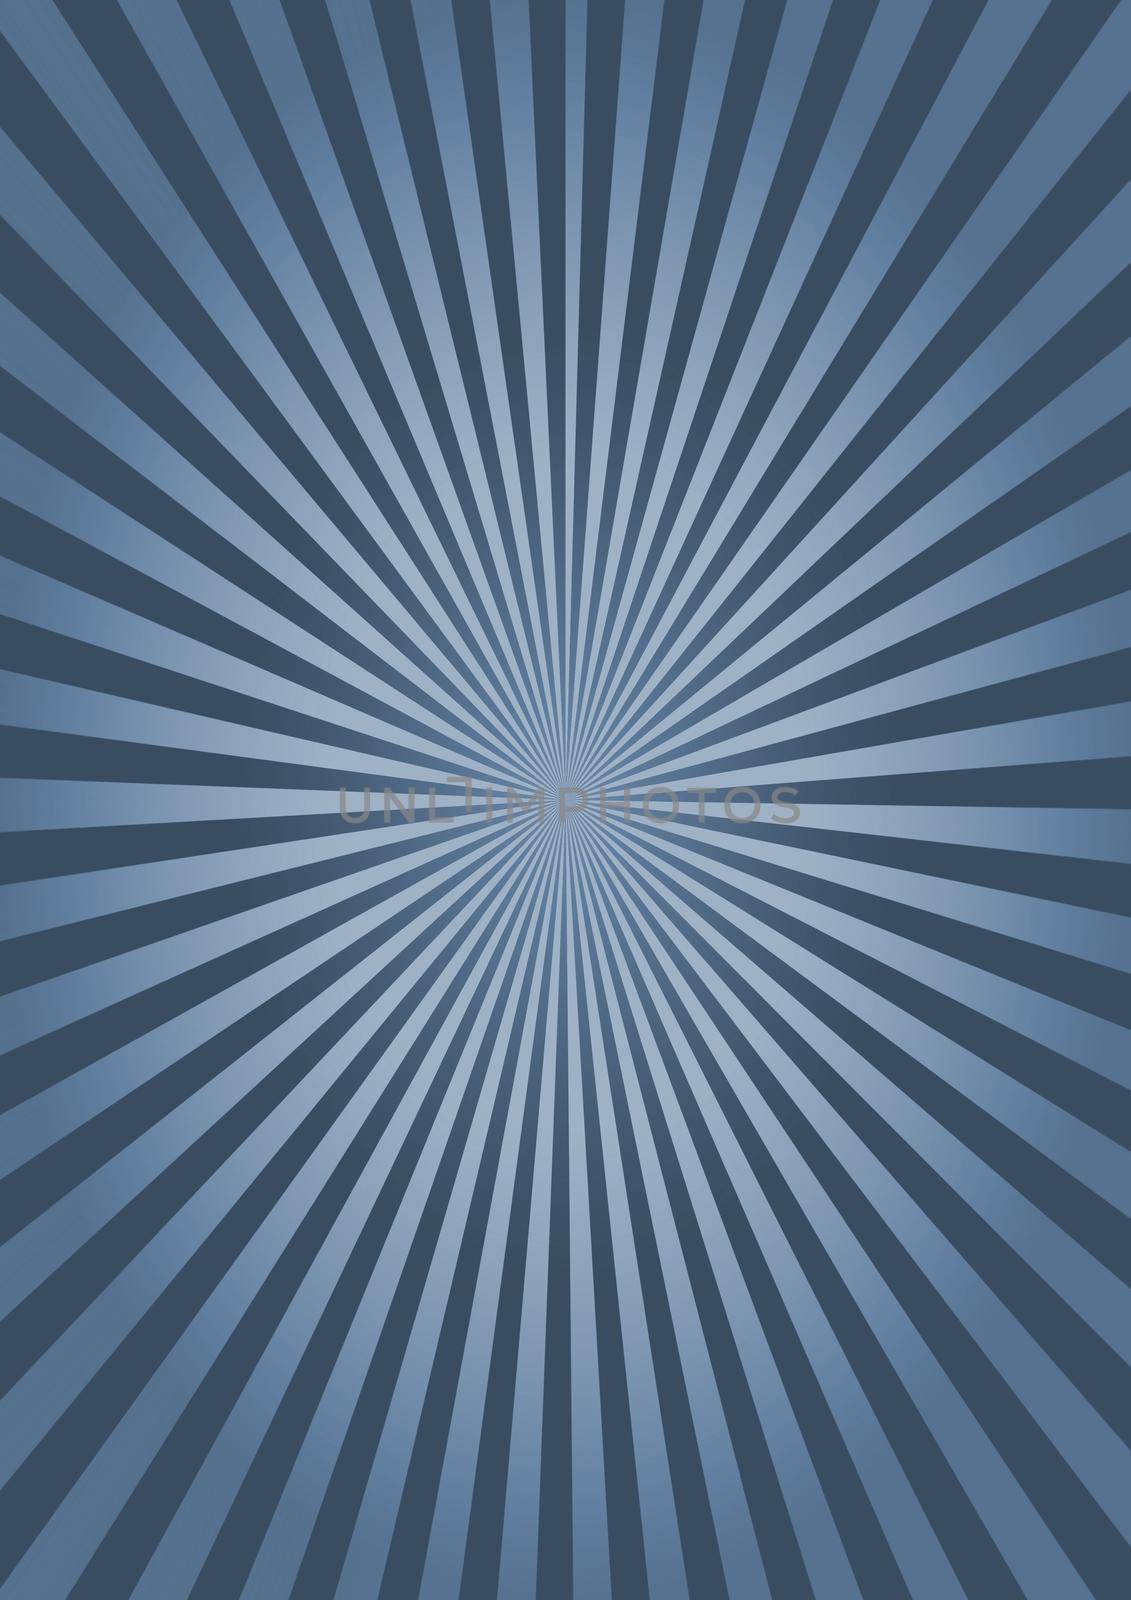 Abstract blue bright striped background with sunburst